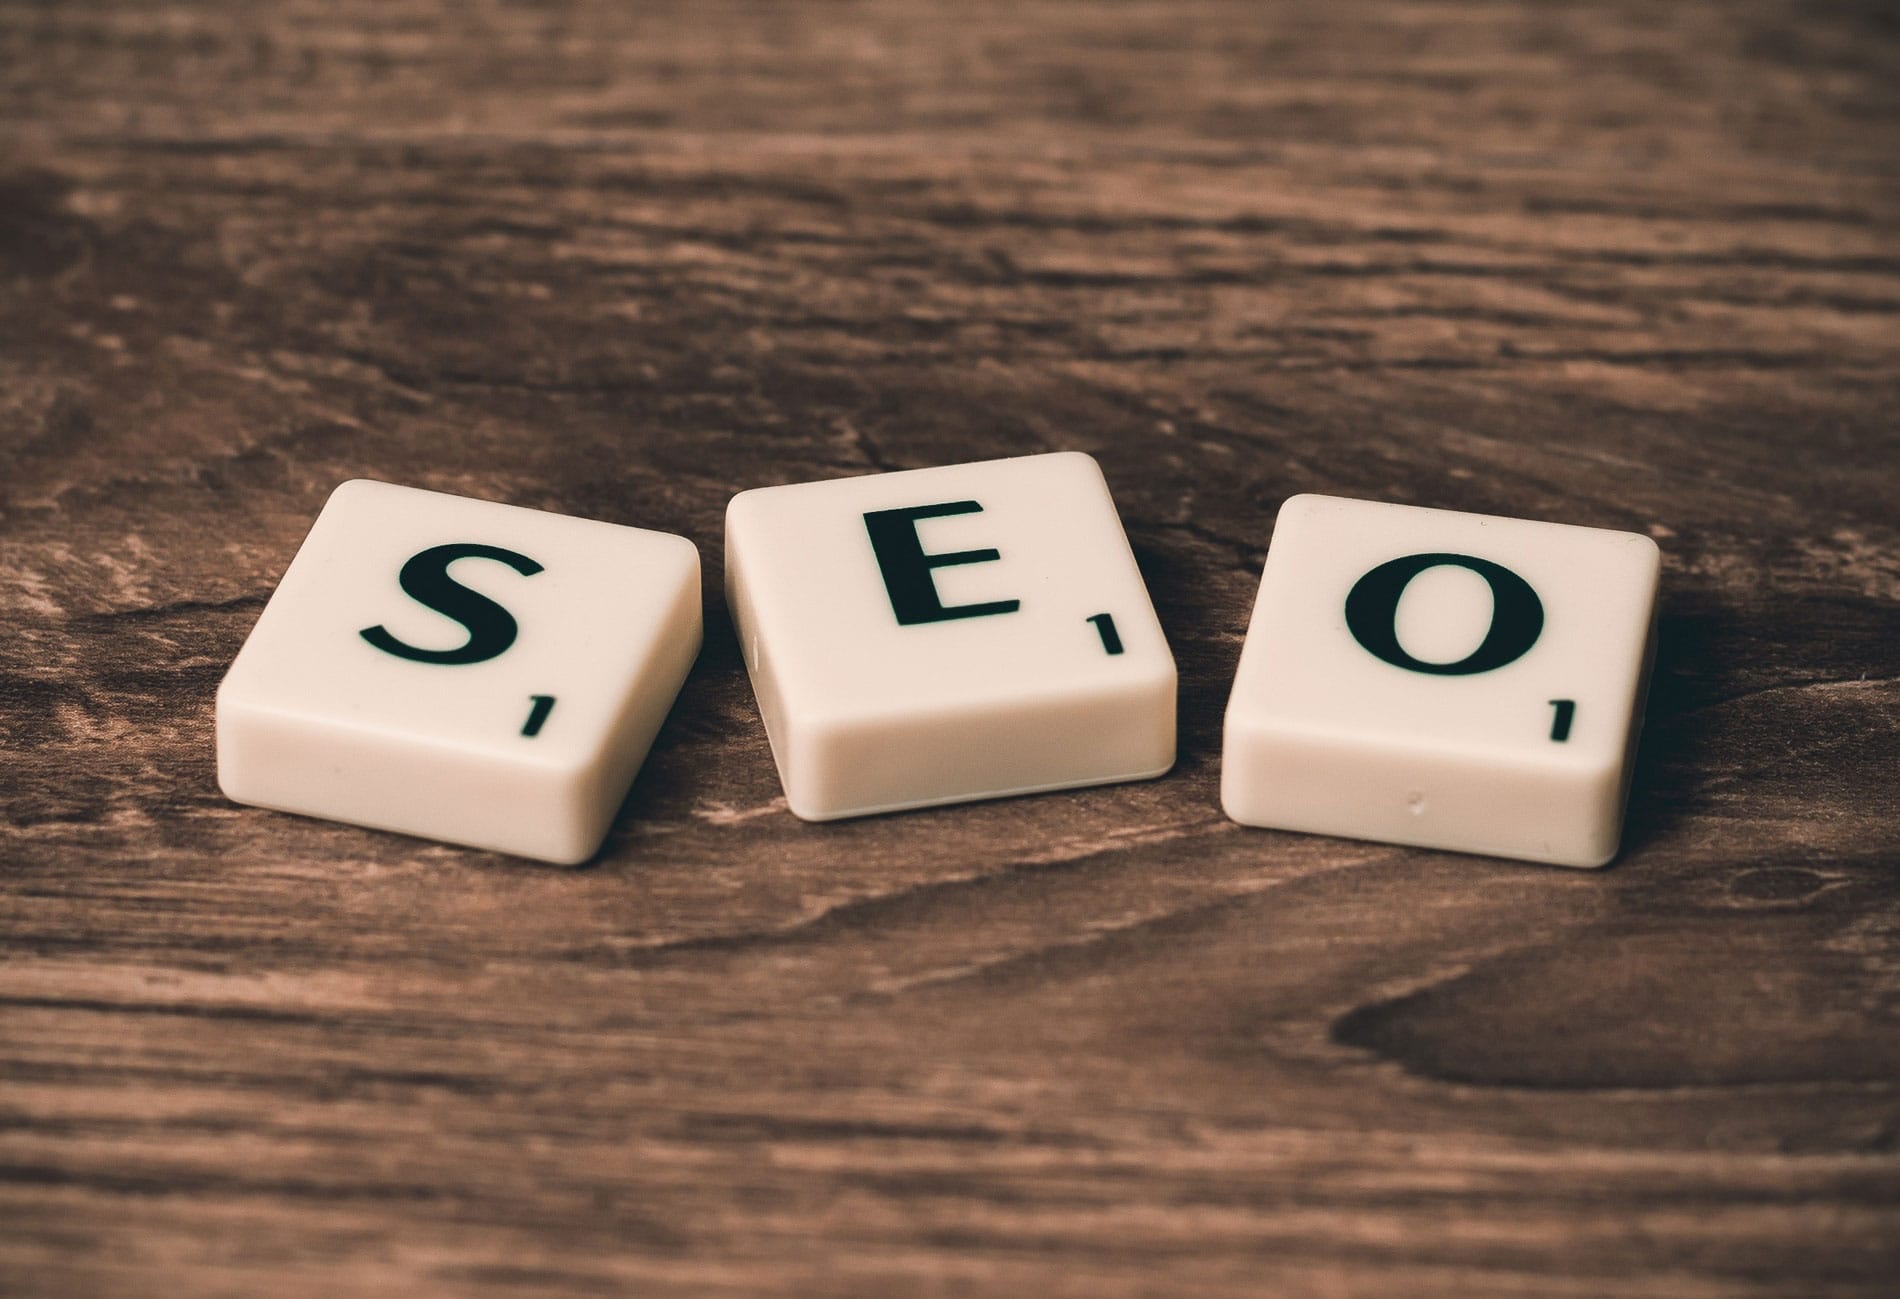 What Is SEO? Why Is It Good For Your Marketing?